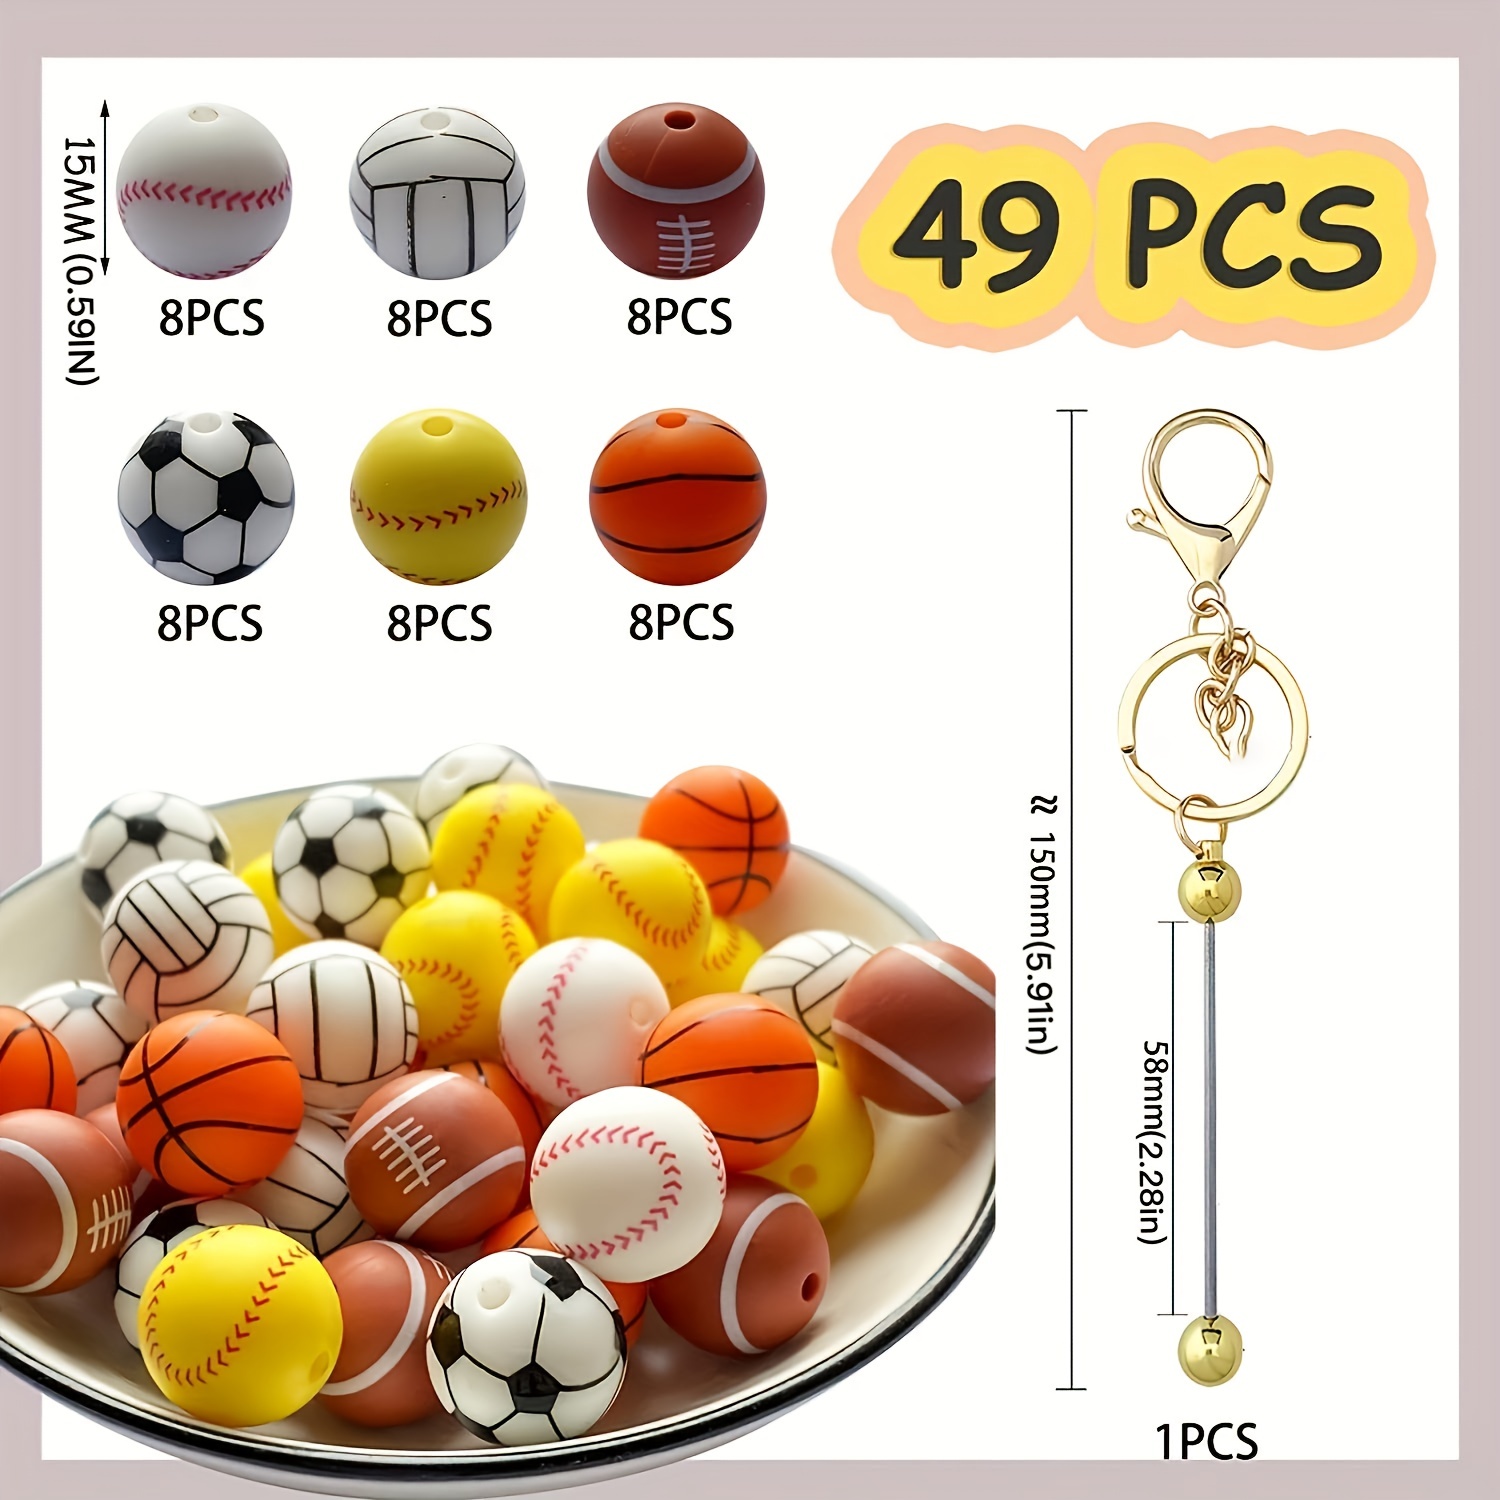 TEHAUX 528 Pcs Silicone Bead Kit Silicone Toys Football Keychain Amulet  Necklace Volleyball Beads Hexagon Silicone Beads Silicone Teething Beads  Silicone Round Beads DIY Loose Beads Baby As Shownx3pcs 1.5X1.5X1.5CMx3pcs